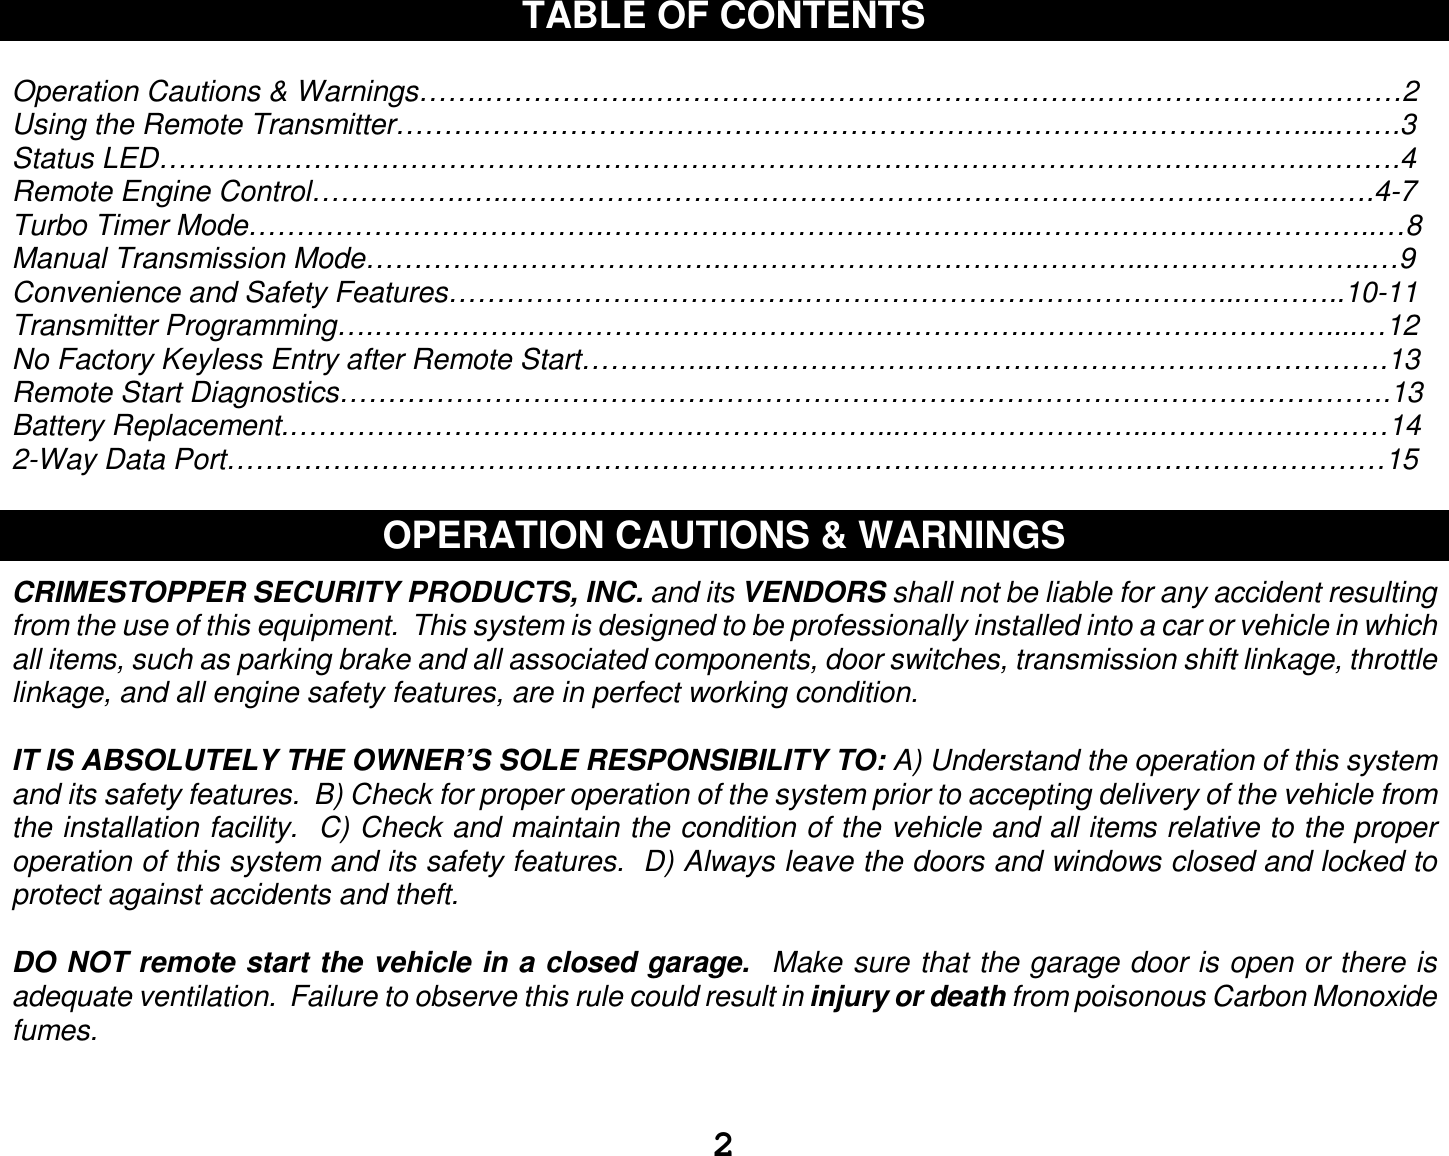  2 TABLE OF CONTENTS  Operation Cautions &amp; Warnings…….……………..….…………………………………….…………….….…………2 Using the Remote Transmitter………………………………………………………………………….………....…….3 Status LED……………………………………………………………………………………………….……….……….4 Remote Engine Control…………….…..……………………………………………………………….…….……….4-7 Turbo Timer Mode……………………………….……………………………………...……………….……………..…8 Manual Transmission Mode……………………………….……………………………………...…………………..…9 Convenience and Safety Features……………………………….………………………………….…...………..10-11 Transmitter Programming….…………….…………………………………………….……………….…………....…12 No Factory Keyless Entry after Remote Start…………..…………………………………………………………….13 Remote Start Diagnostics……………………………………………………………………………………………….13 Battery Replacement.…………………………………….………………...……………………..…………….………14 2-Way Data Port…………………………………………………………………………………………………………15  OPERATION CAUTIONS &amp; WARNINGS  CRIMESTOPPER SECURITY PRODUCTS, INC. and its VENDORS shall not be liable for any accident resulting from the use of this equipment.  This system is designed to be professionally installed into a car or vehicle in which all items, such as parking brake and all associated components, door switches, transmission shift linkage, throttle linkage, and all engine safety features, are in perfect working condition.  IT IS ABSOLUTELY THE OWNER’S SOLE RESPONSIBILITY TO: A) Understand the operation of this system and its safety features.  B) Check for proper operation of the system prior to accepting delivery of the vehicle from the installation facility.  C) Check and maintain the condition of the vehicle and all items relative to the proper operation of this system and its safety features.  D) Always leave the doors and windows closed and locked to protect against accidents and theft.  DO NOT remote start the vehicle in a closed garage.  Make sure that the garage door is open or there is adequate ventilation.  Failure to observe this rule could result in injury or death from poisonous Carbon Monoxide fumes.   